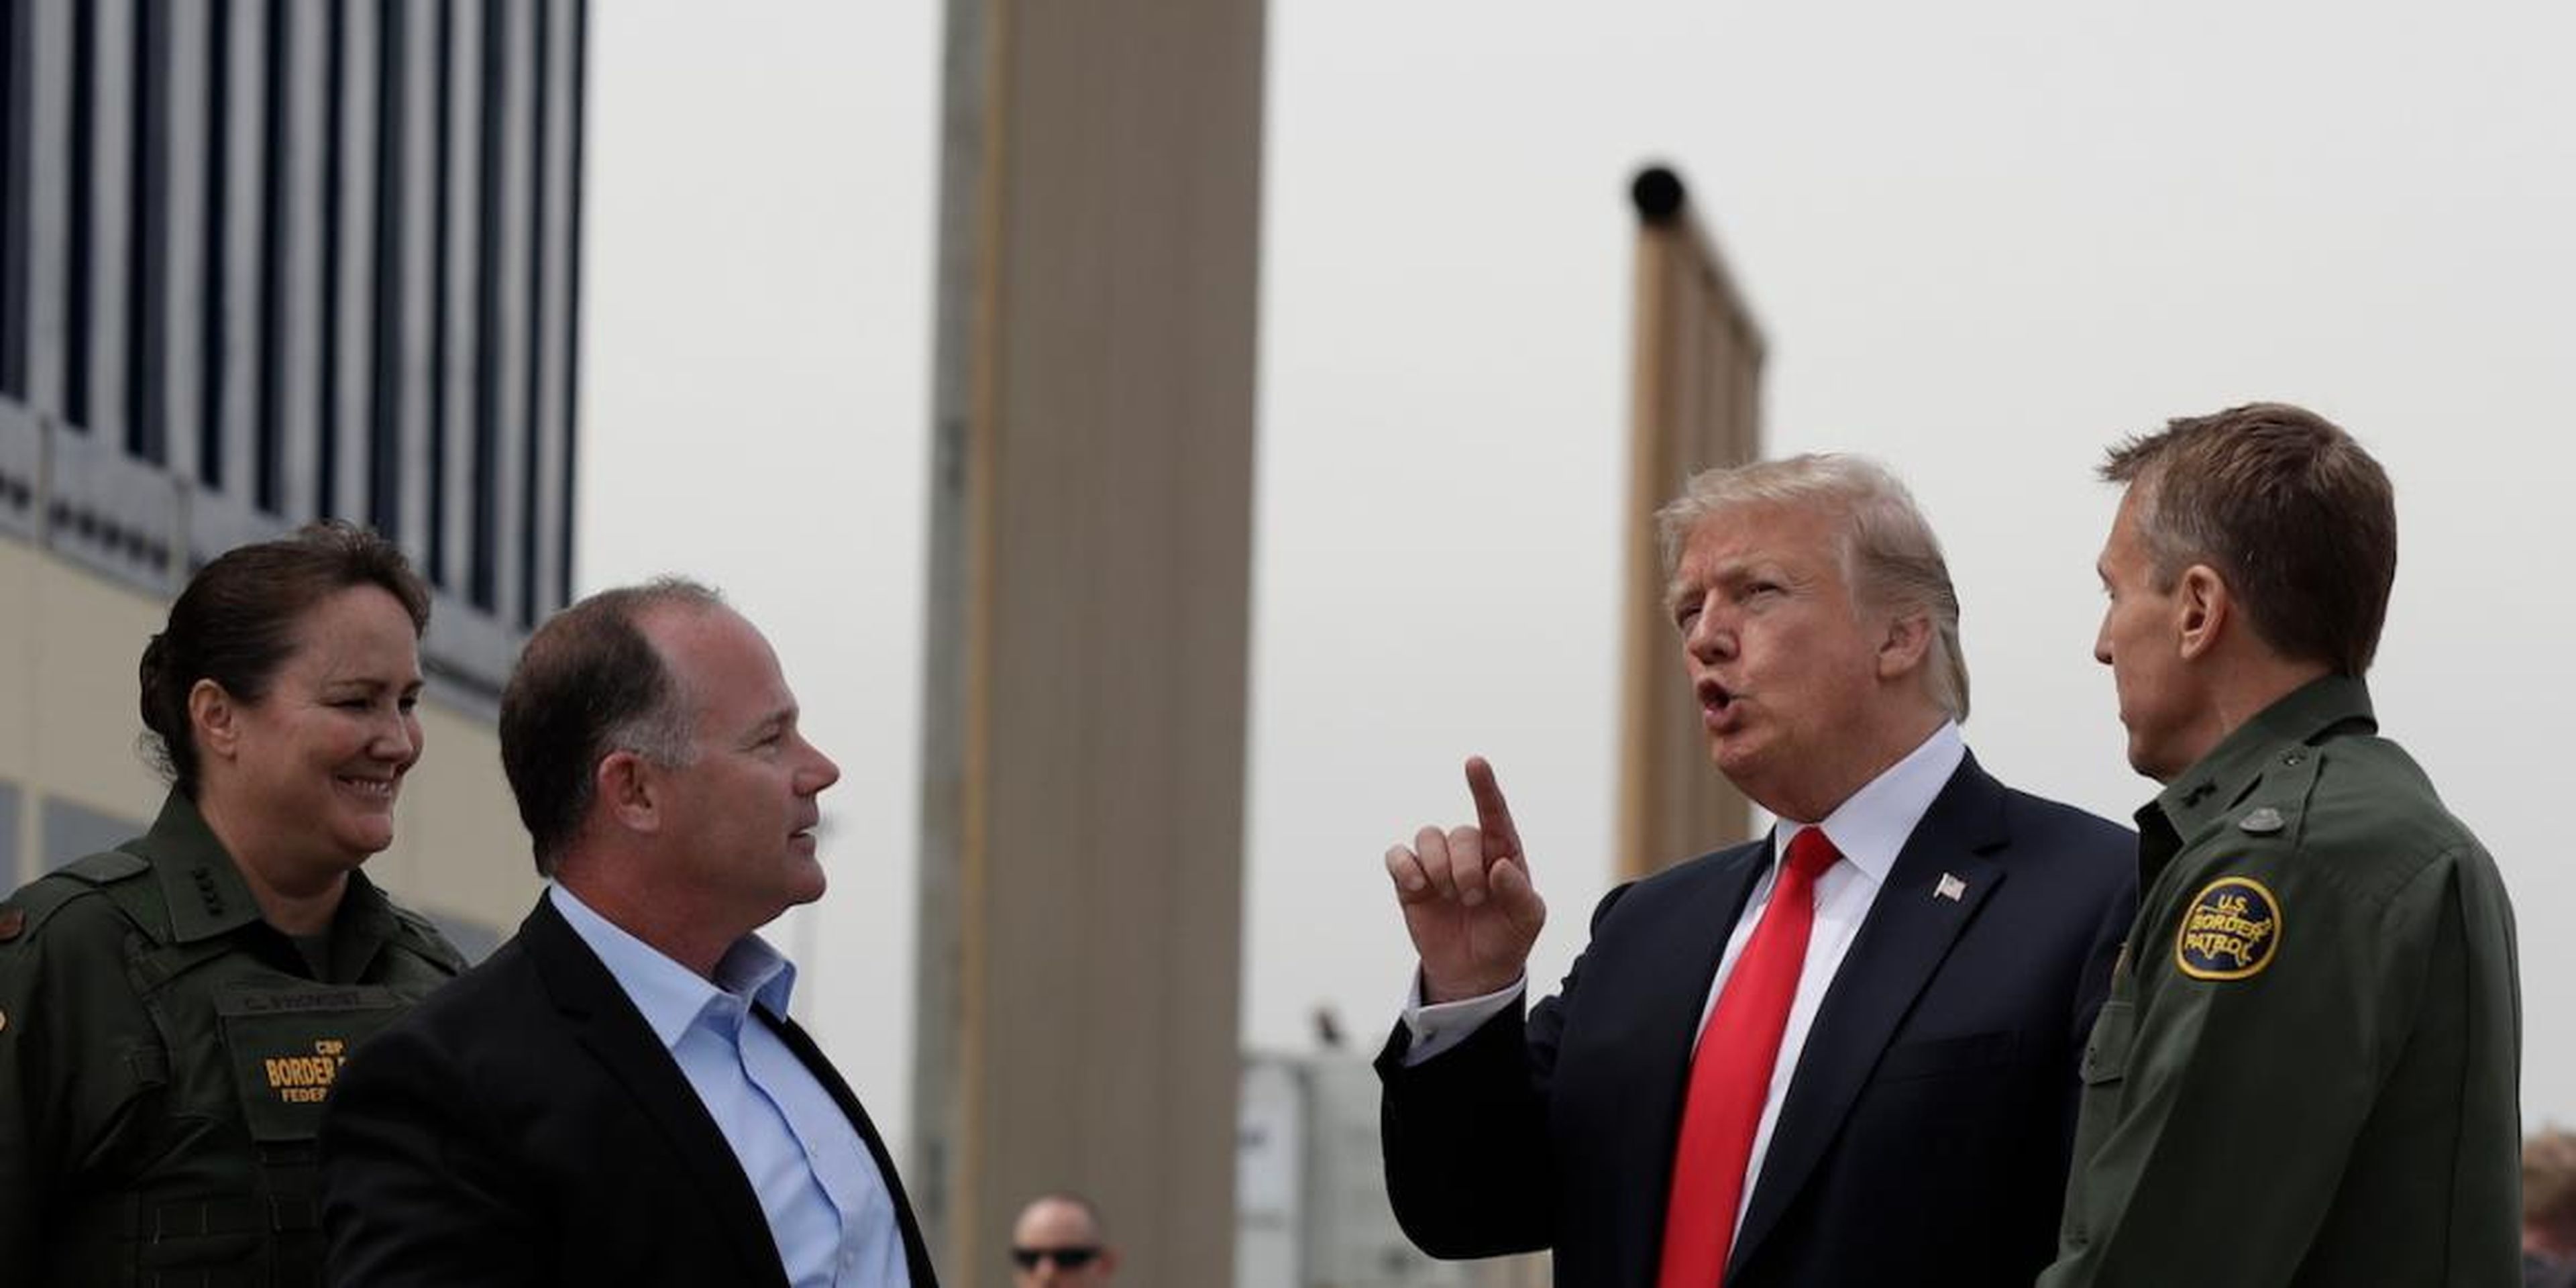 President Donald Trump reviewing border-wall prototypes in San Diego in March 2018. He has been "micromanaging" plans for his border wall "down to the smallest design details," The Washington Post reported Thursday.